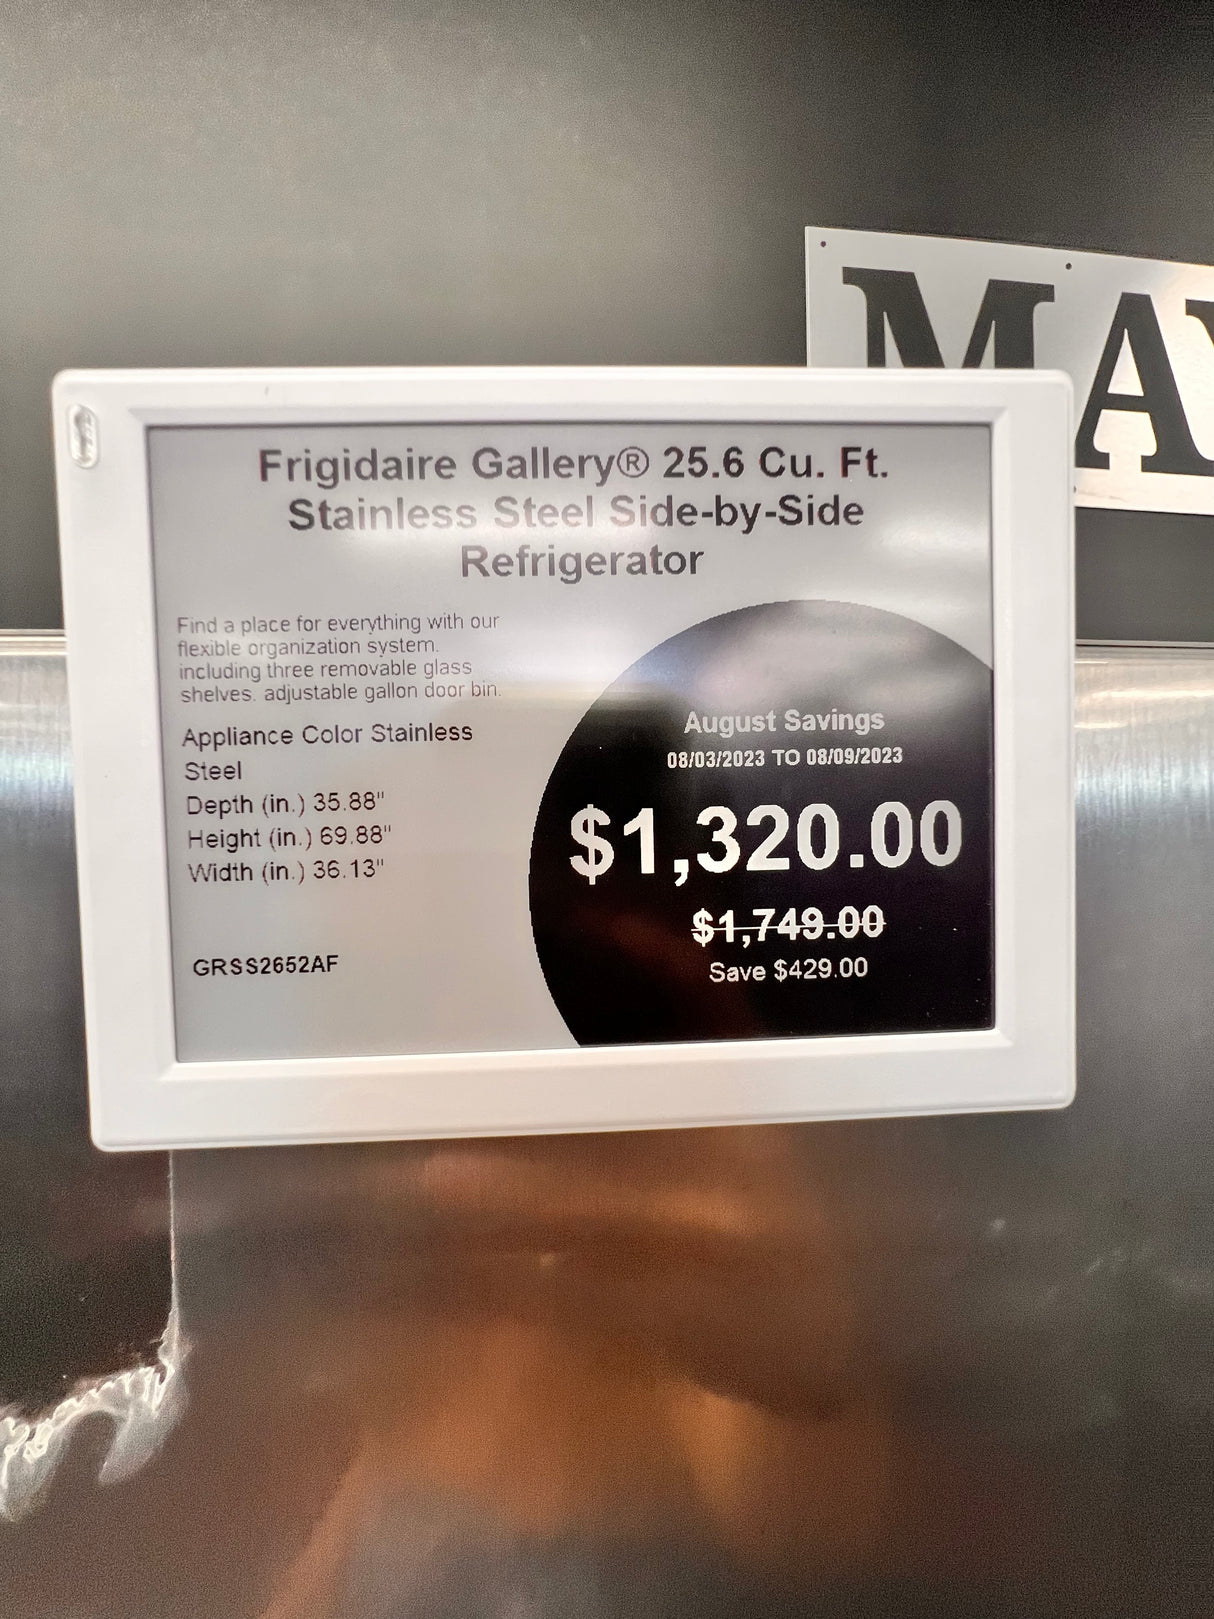 Frigidaire gallery 25.6 ft.³ stainless steel side-by-side refrigerator GRSS2652AF